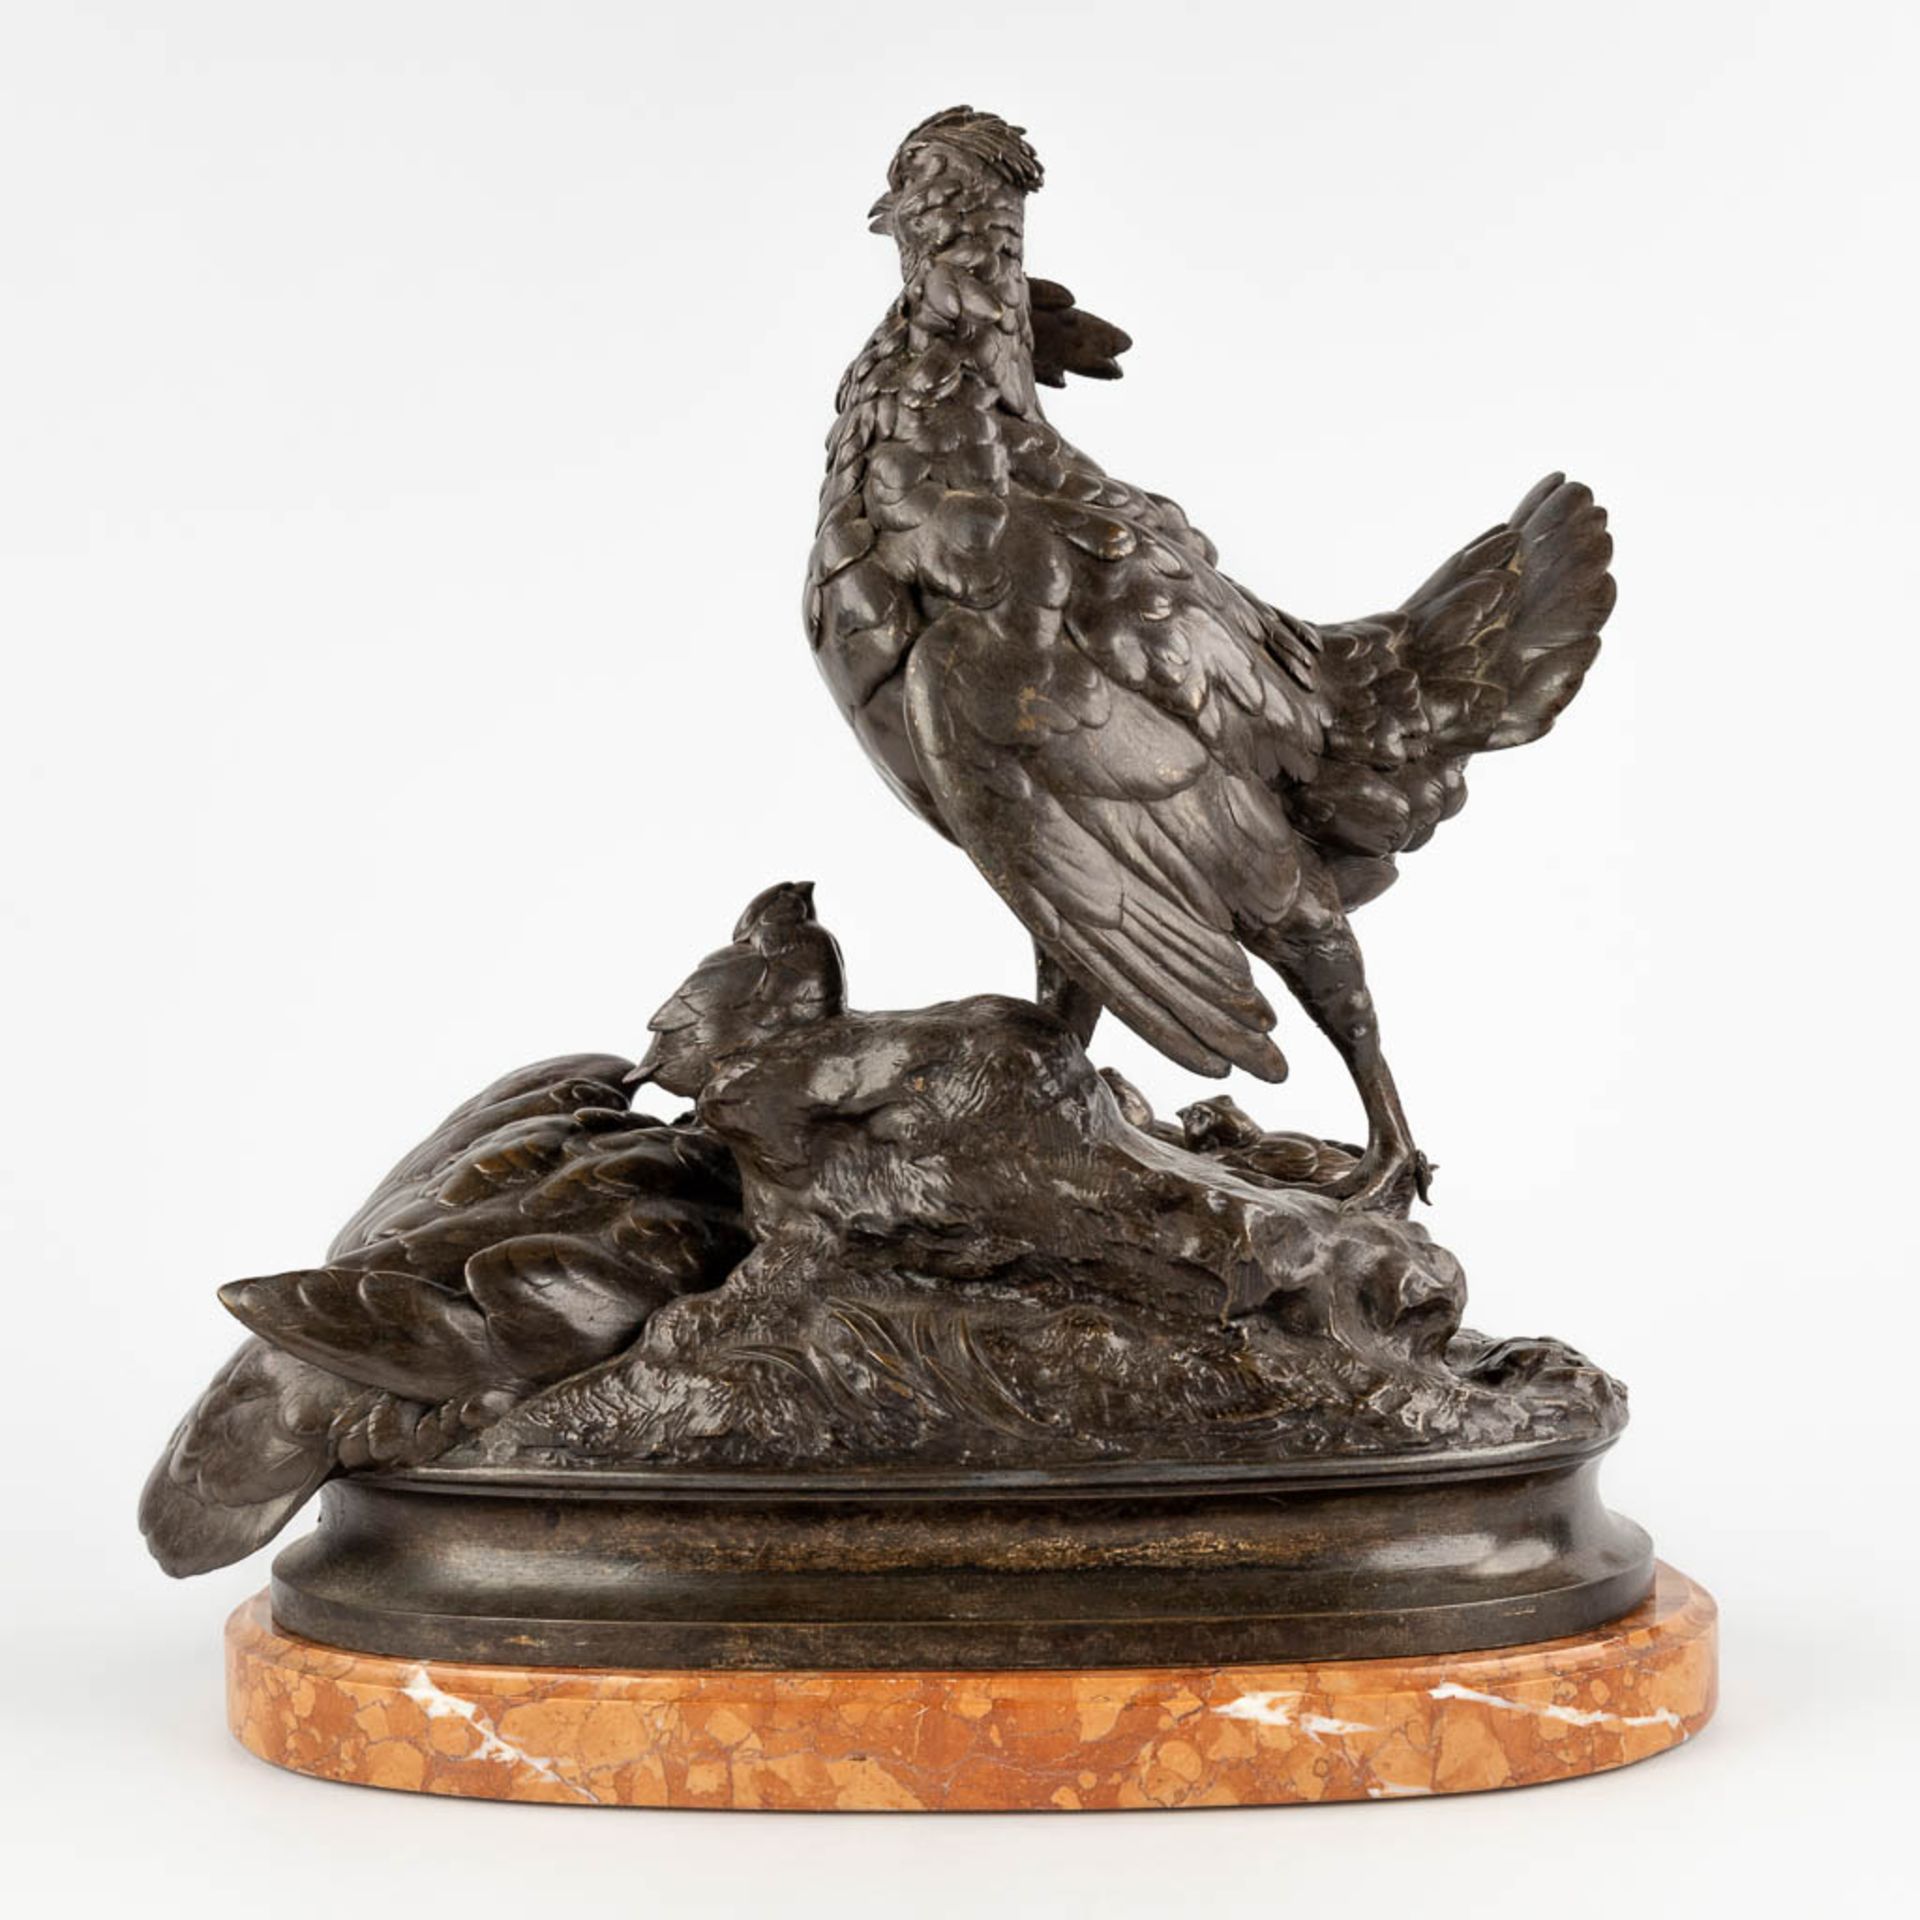 Alphonse ARSON (1822-1895) 'Partridge with chicks' patinated bronze. 1877. (D:22 x W:40 x H:41 cm) - Image 5 of 14